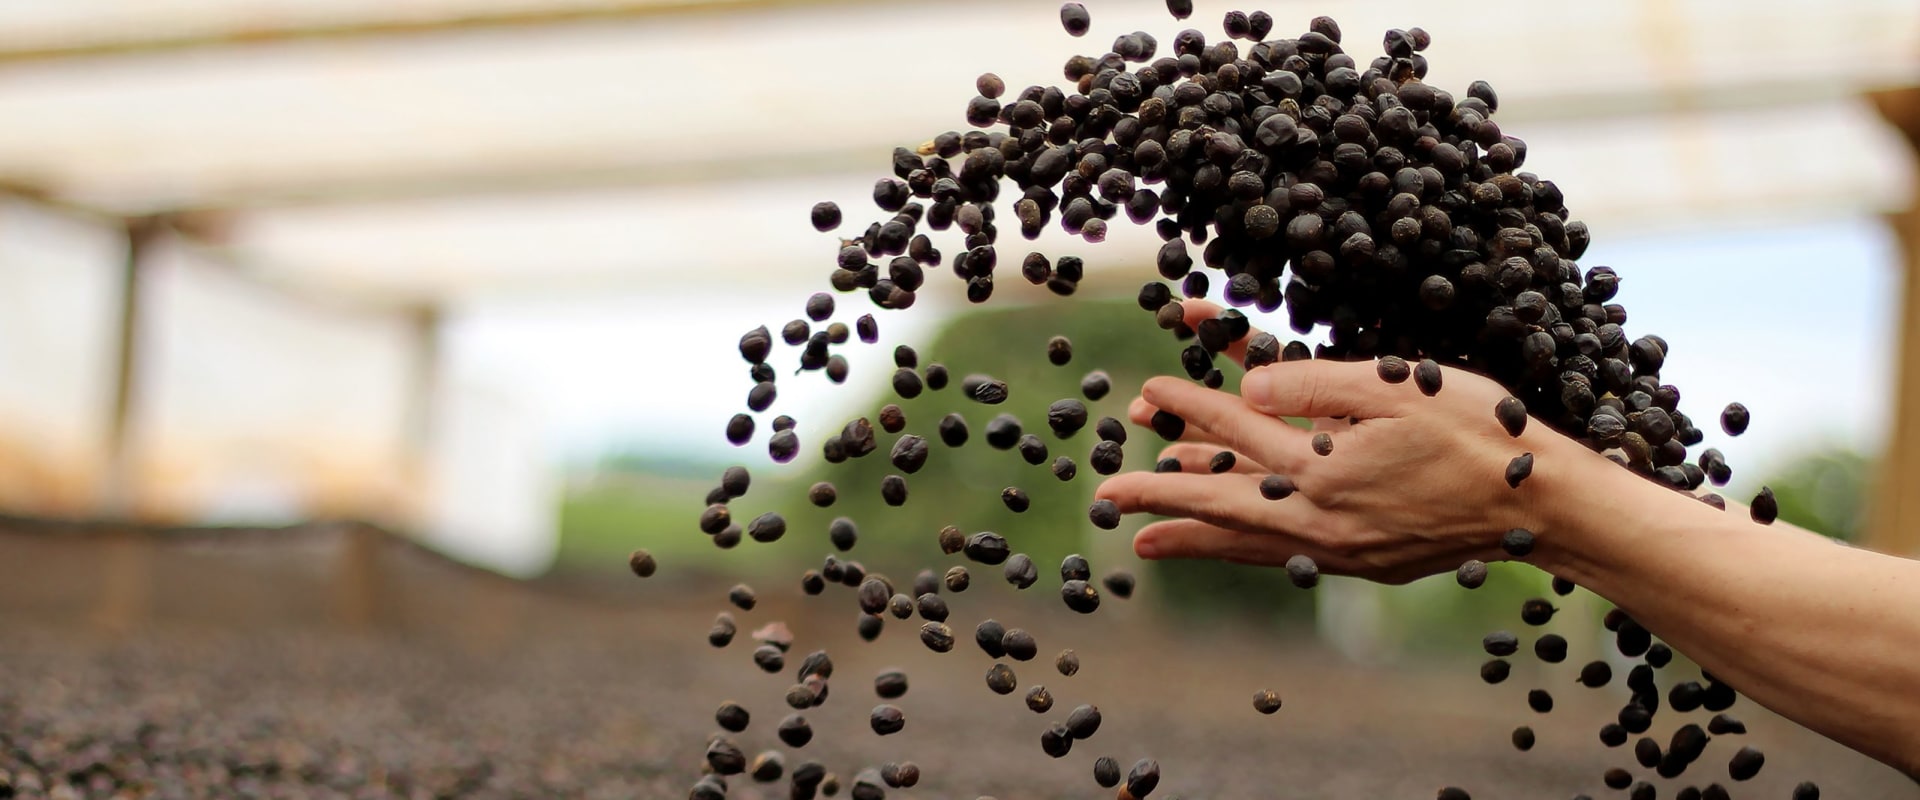 What is sustainable coffee farming?